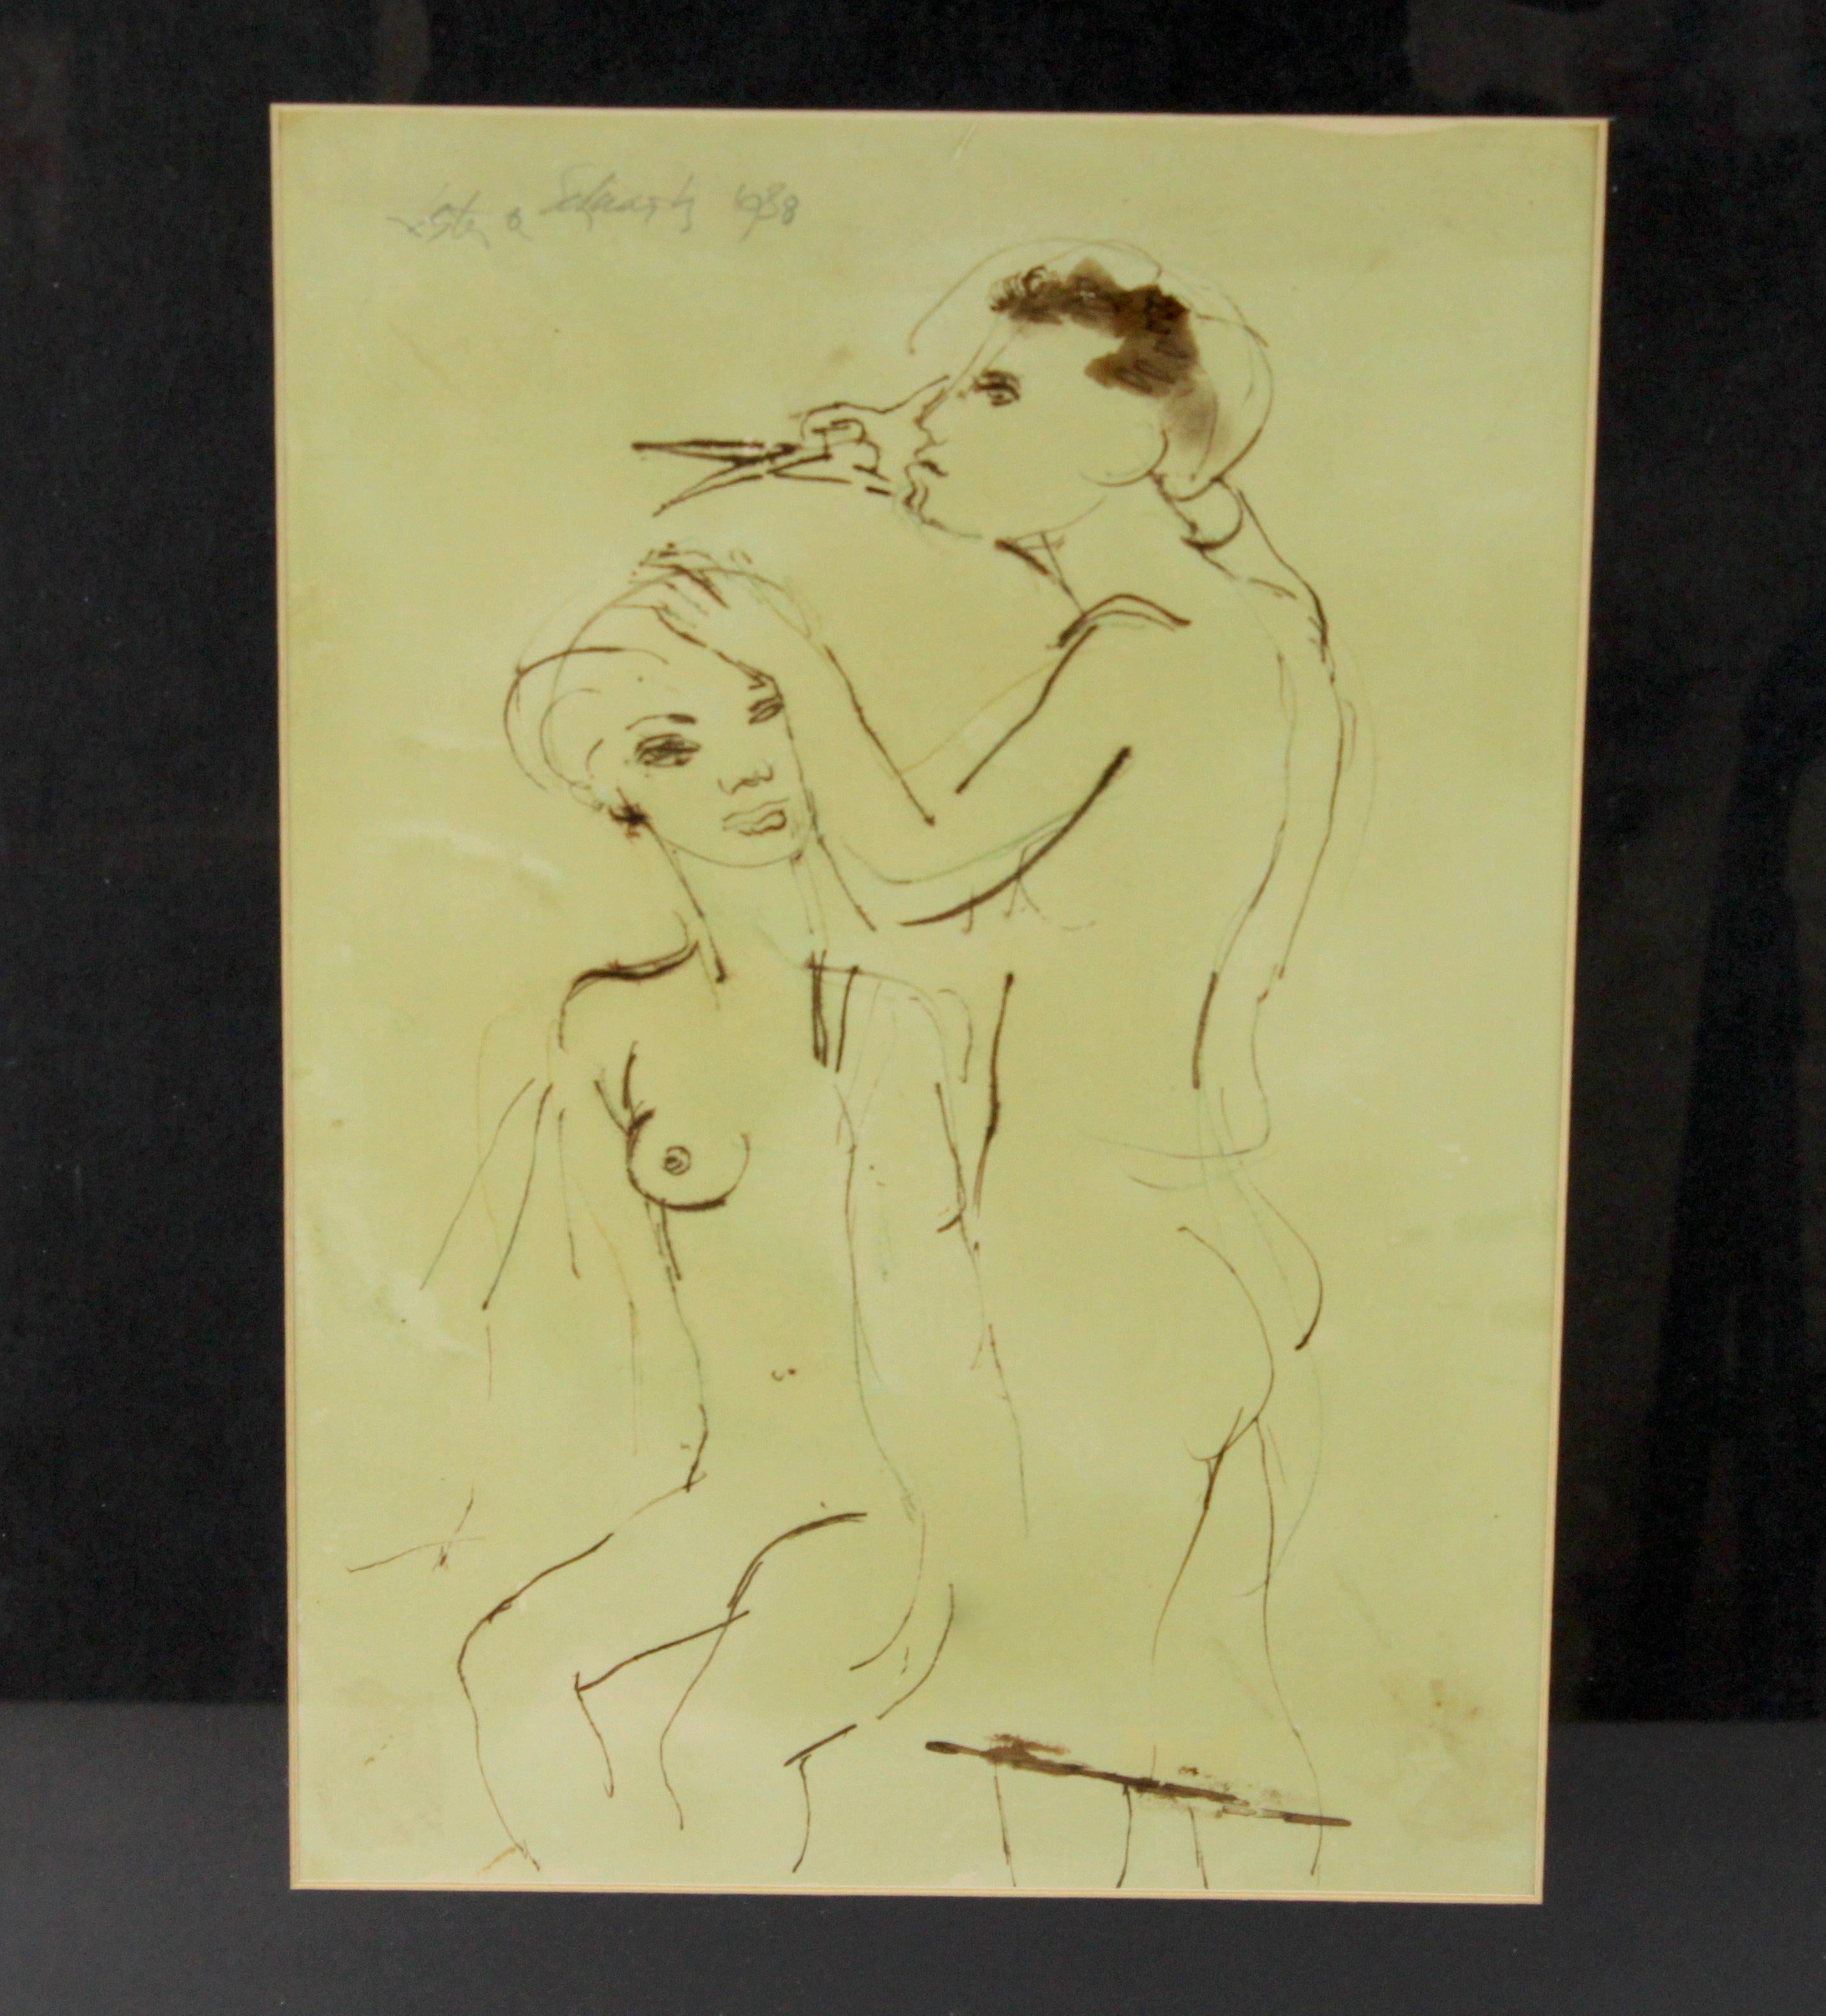 The original pen and ink drawing by Lester O. Schwartz Signed and dated 1938 

' 'Untitled' nude study of a man and a woman, the male figure giving the female a haircut. 

Dimensions: Size 48 x 39 x 1.5 cm 
Size within borders 30.5 x 22 cm Weight: